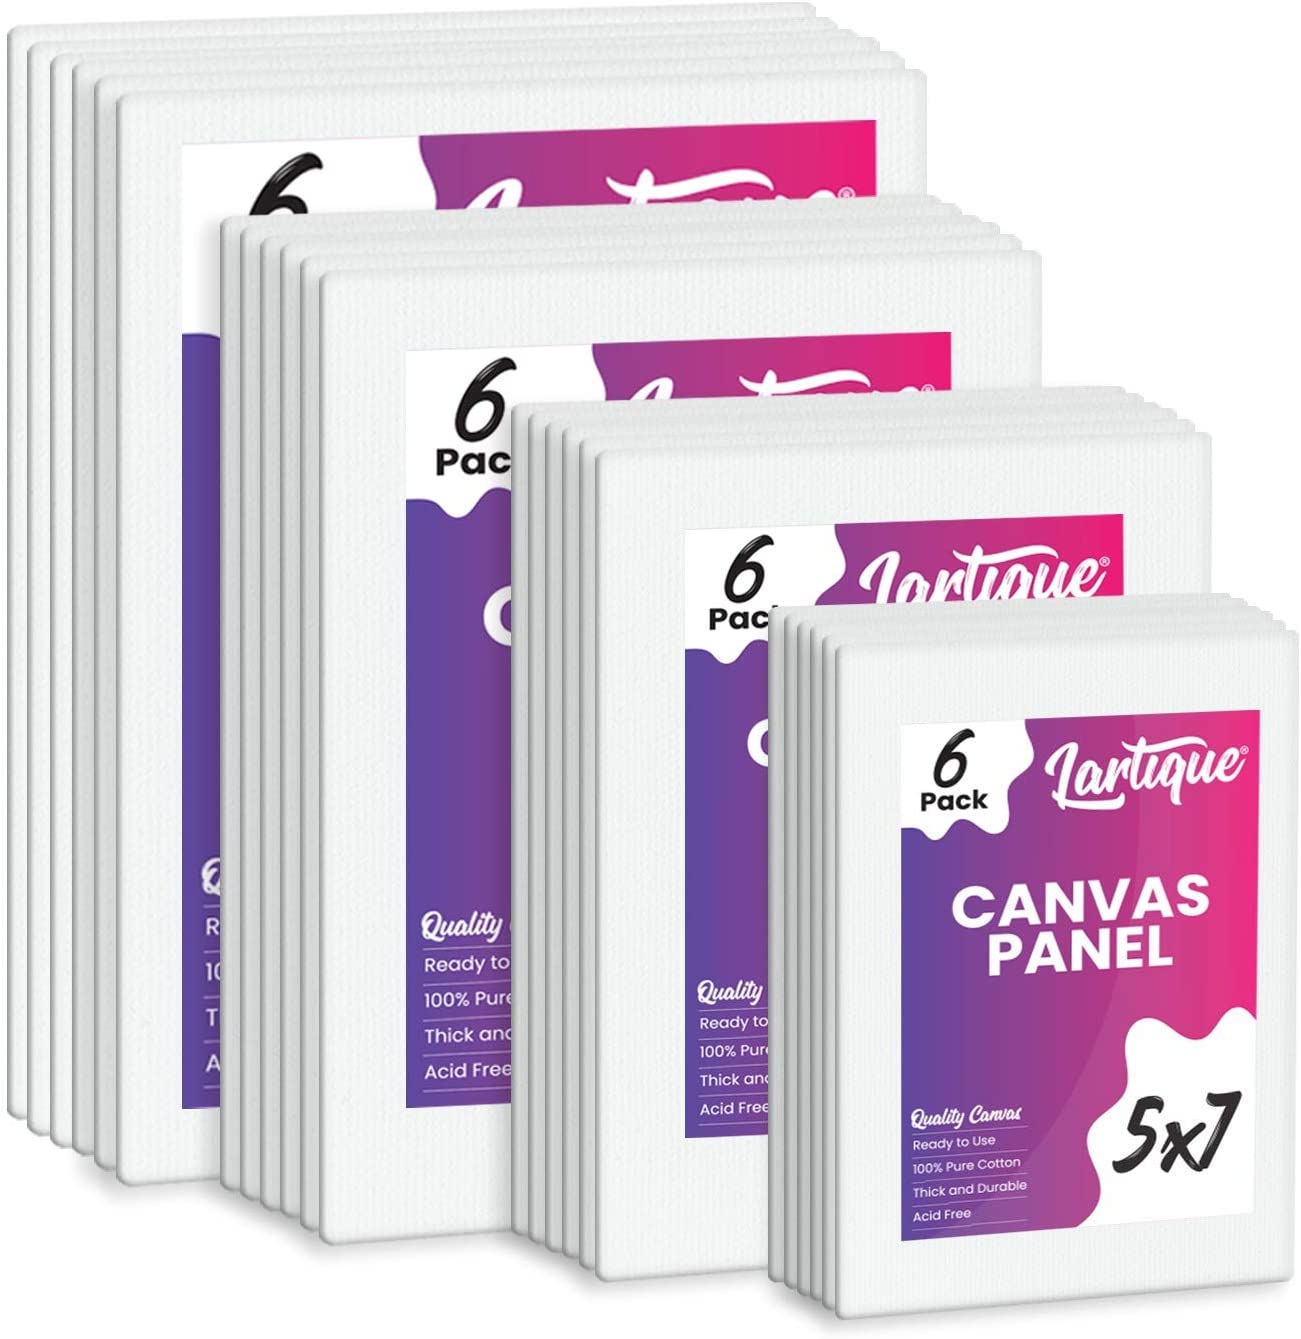  Lartique Multi-Pack Canvases for Painting- 24 Blank Primed  Canvas Boards for Painting - Painting Canvas for Wet & Dry Art Media,  Acrylic, Oil, Gouache & Tempera